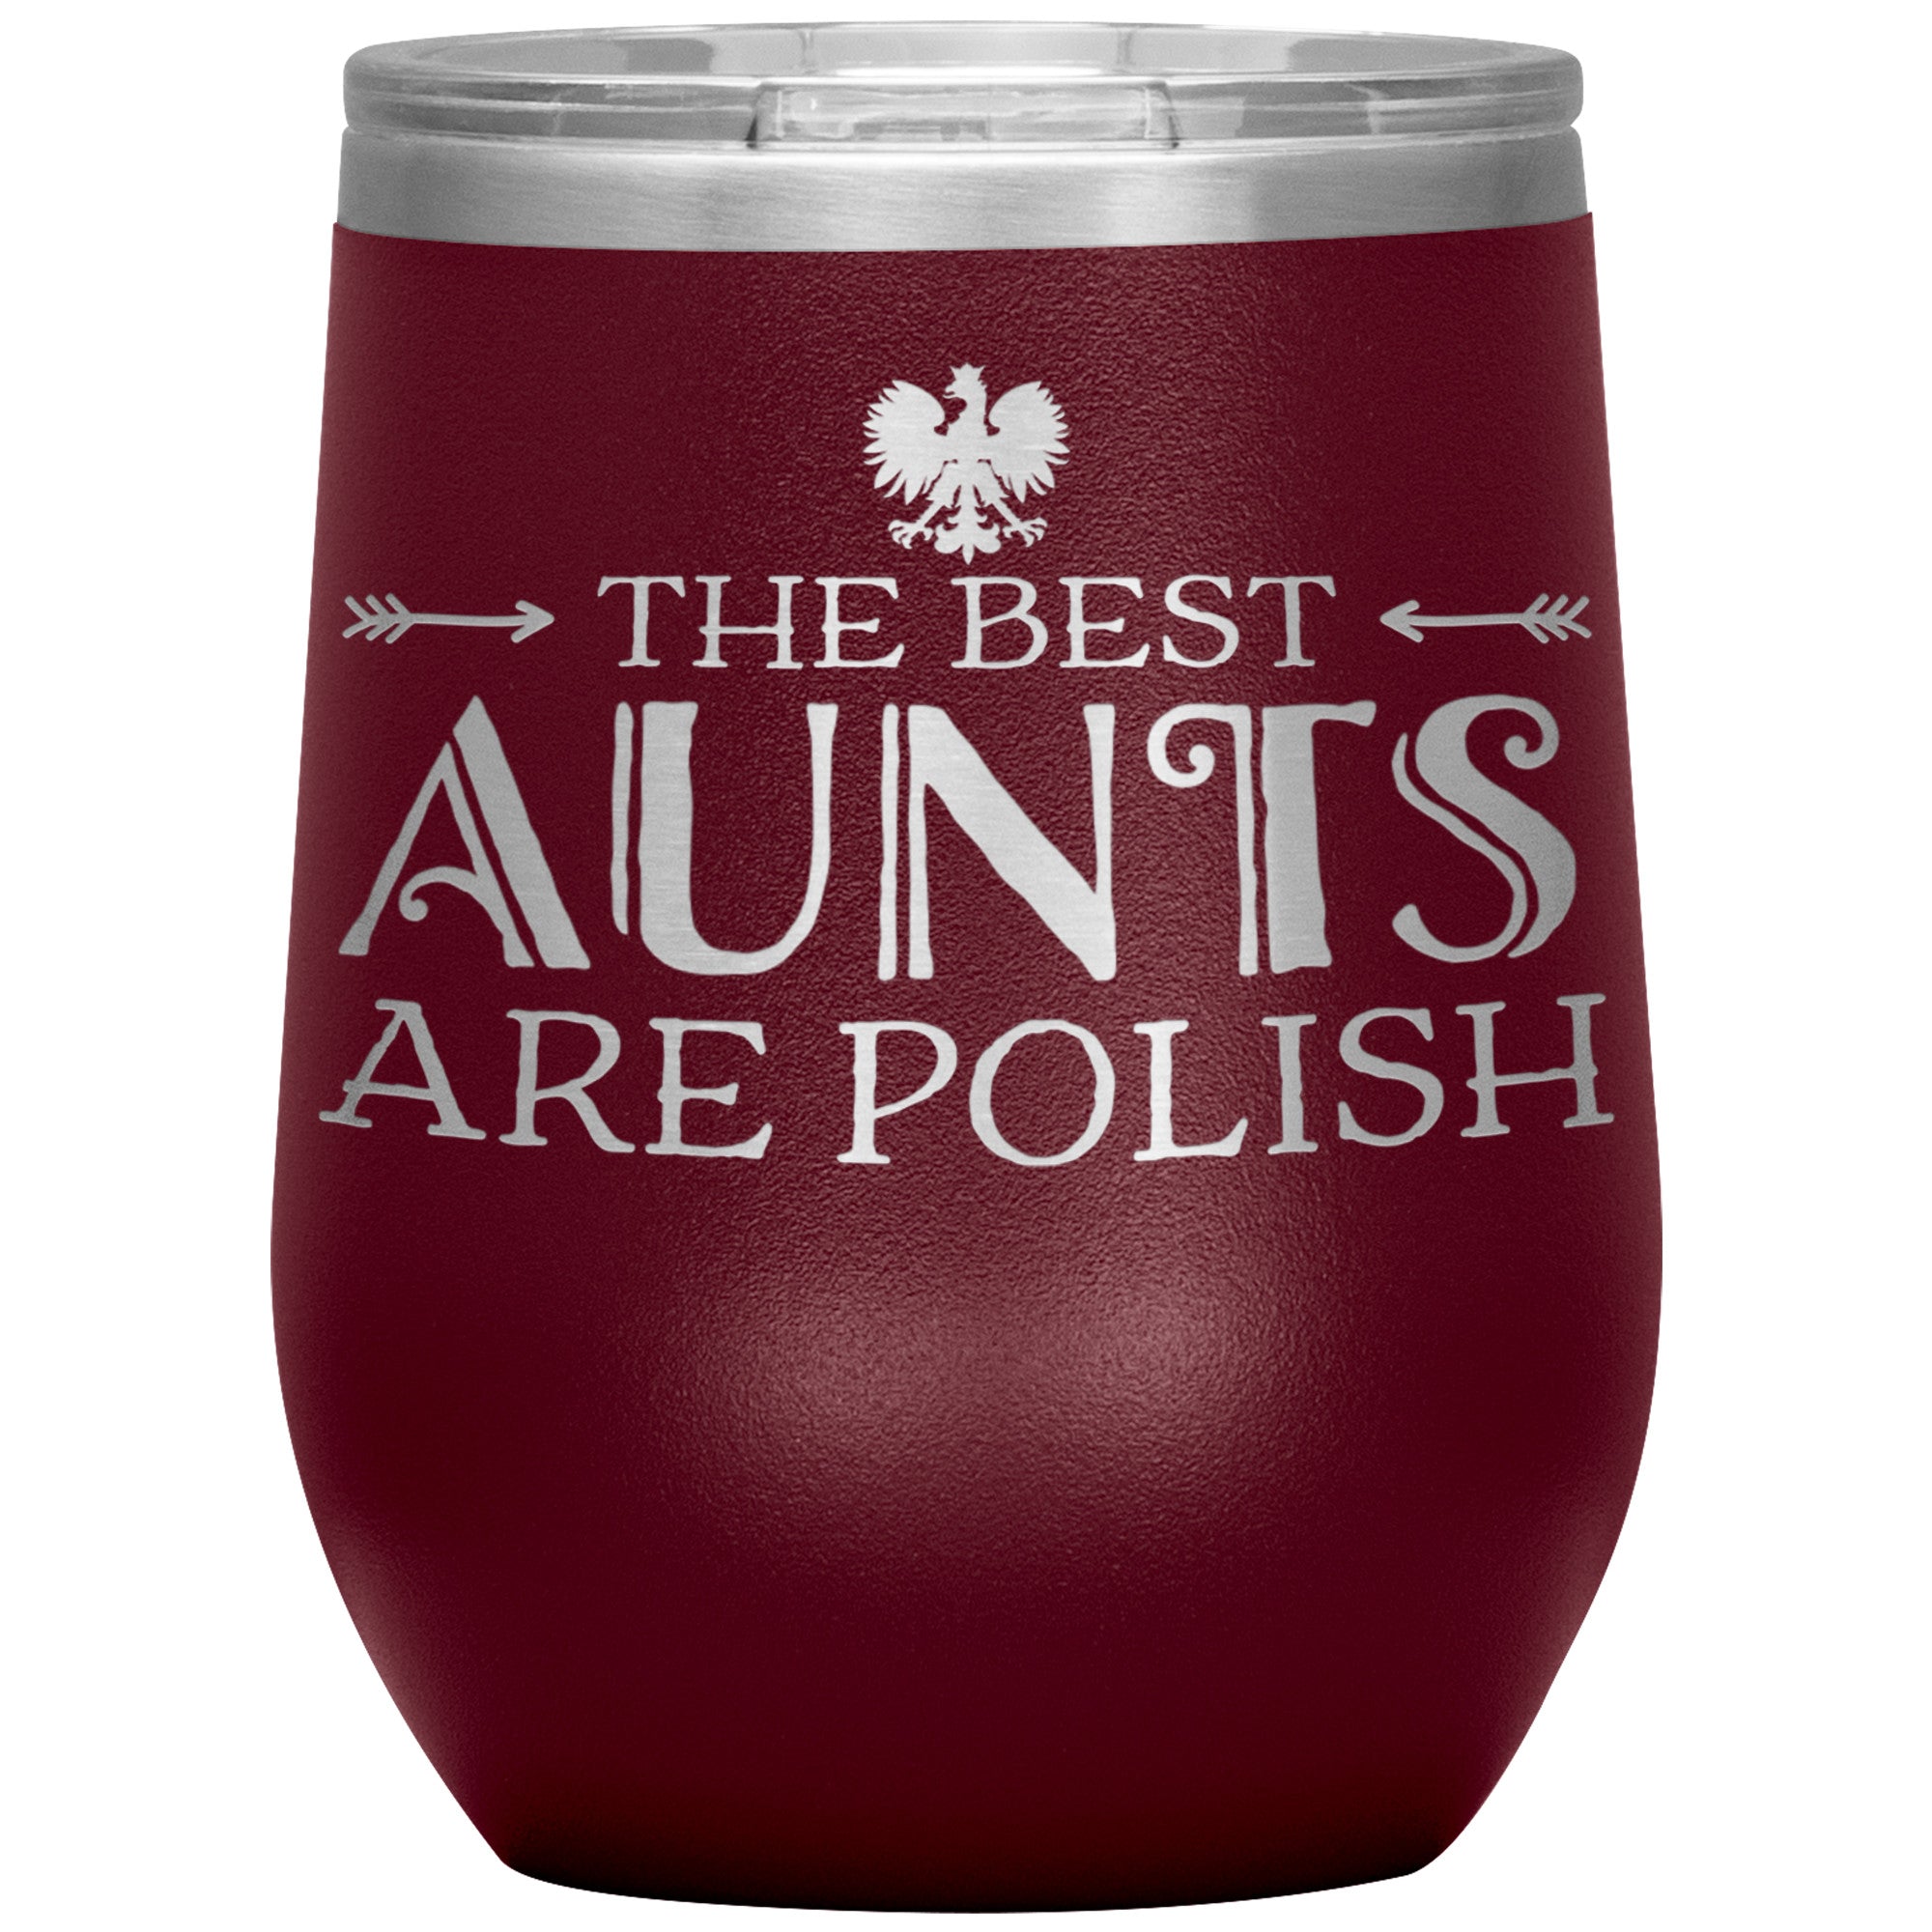 The Best Aunts Are Polish Insulated Wine Tumbler Tumblers teelaunch Maroon  